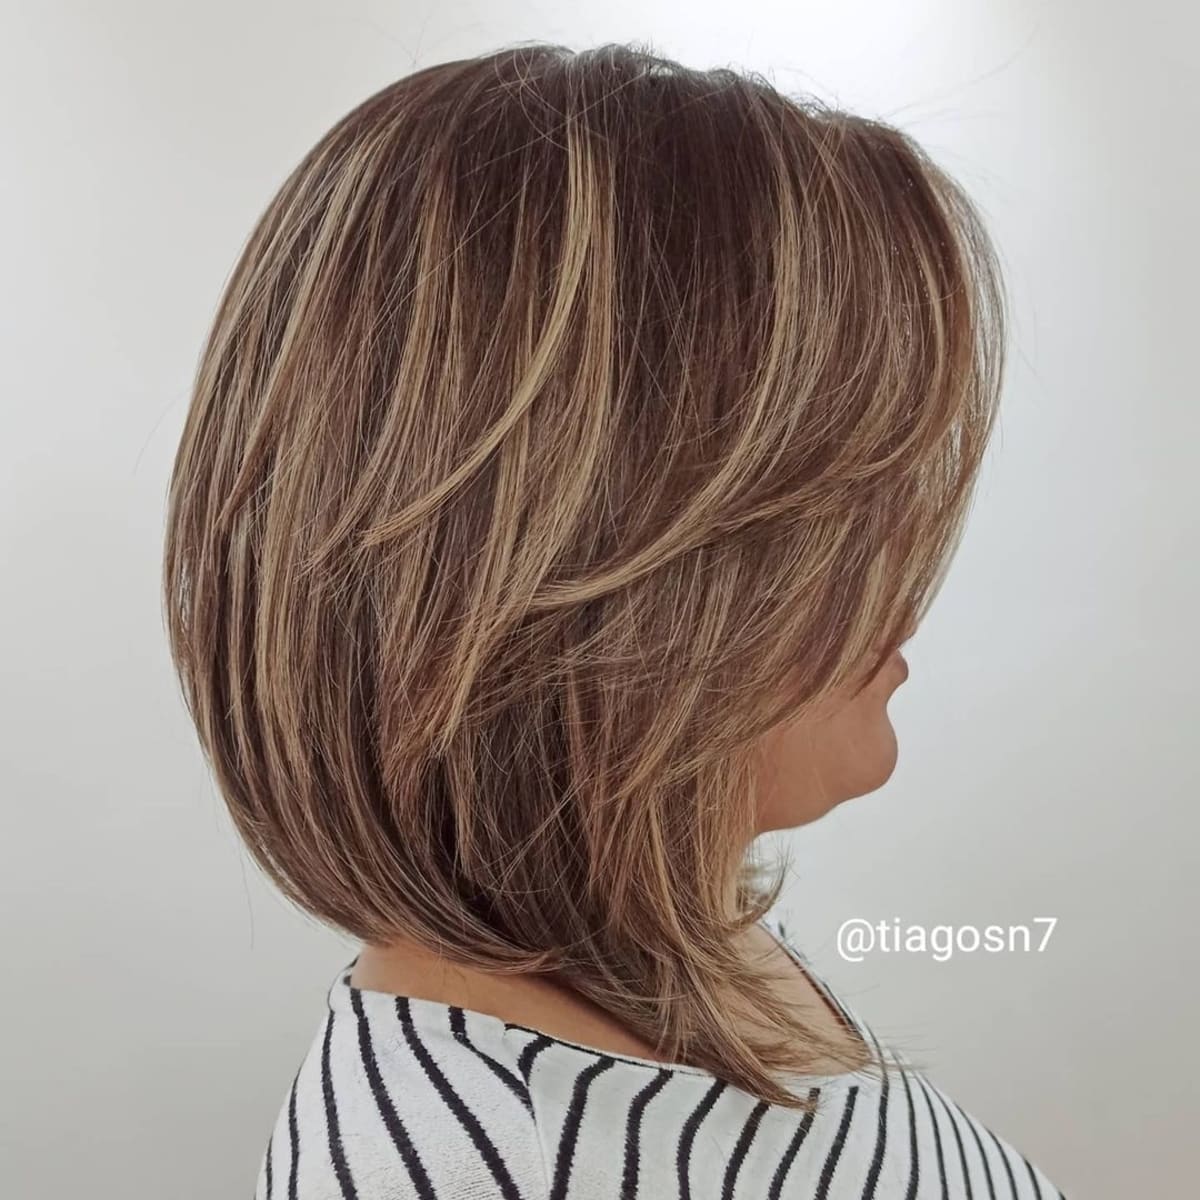 Dimensional Collarbone-Length Graduated Long Bob for a Round Face